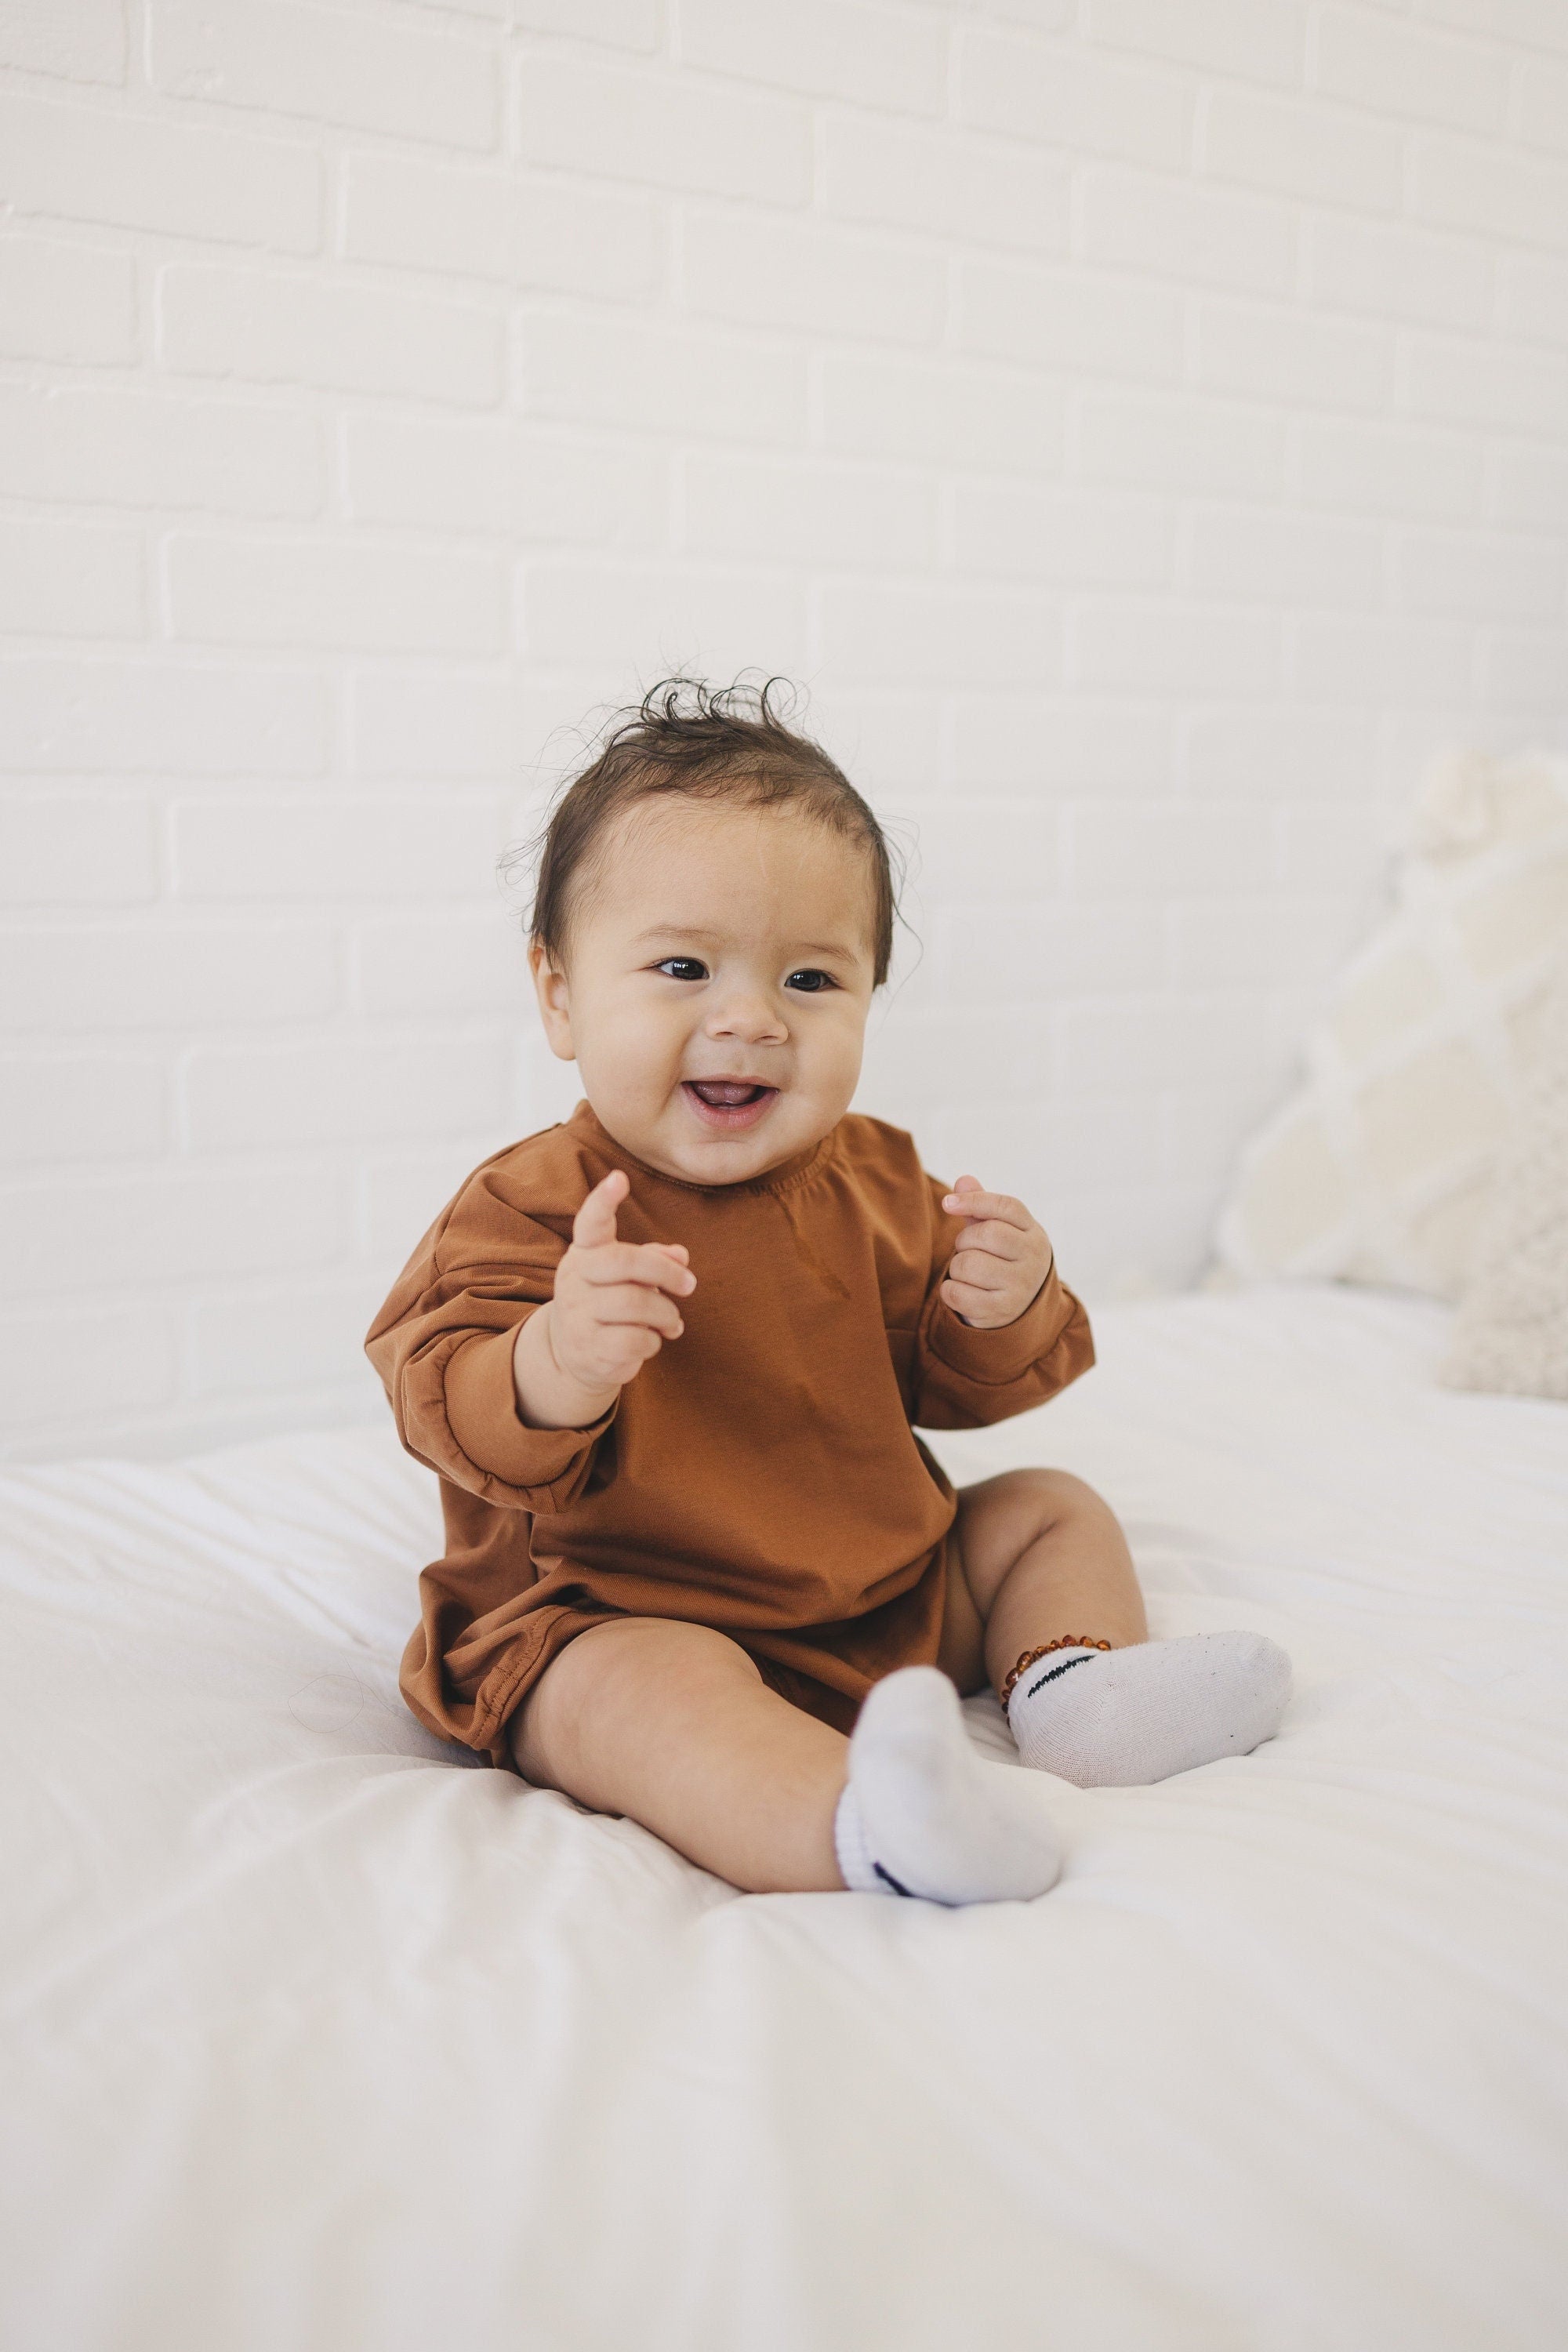 Long-Sleeved Oversized Pocket Tee Romper - LS T-Shirt Romper - Baby Bubble Romper - Spring Winter Baby Clothes - Baby Boy Outfit - Brown